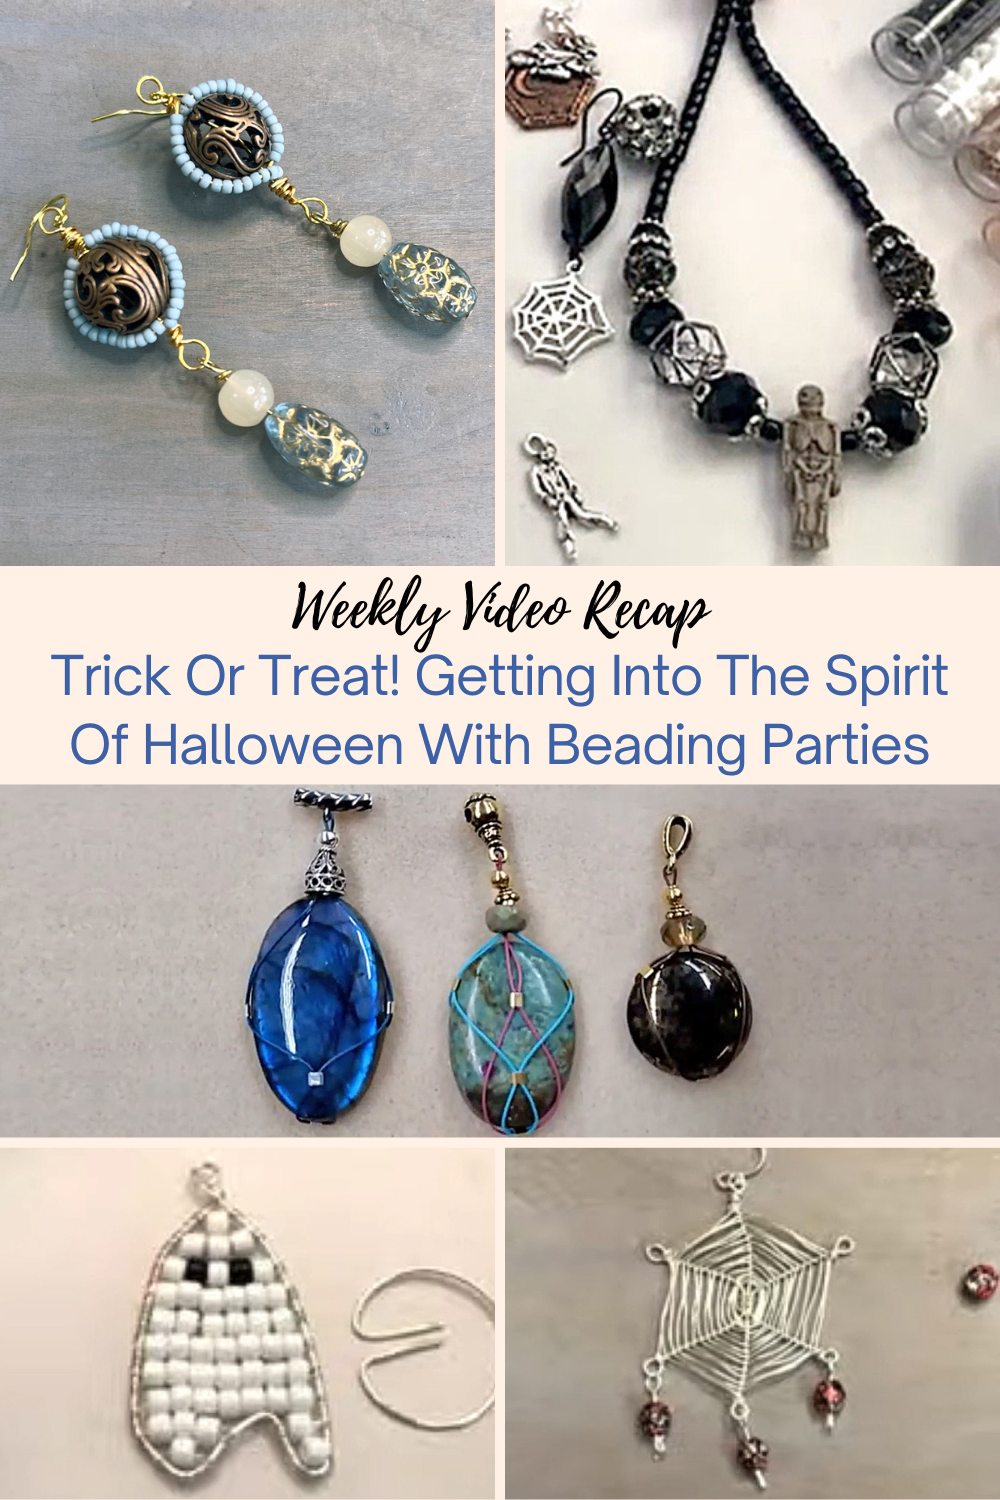 Trick Or Treat! Getting Into The Spirit Of Halloween With Beading Parties Collage